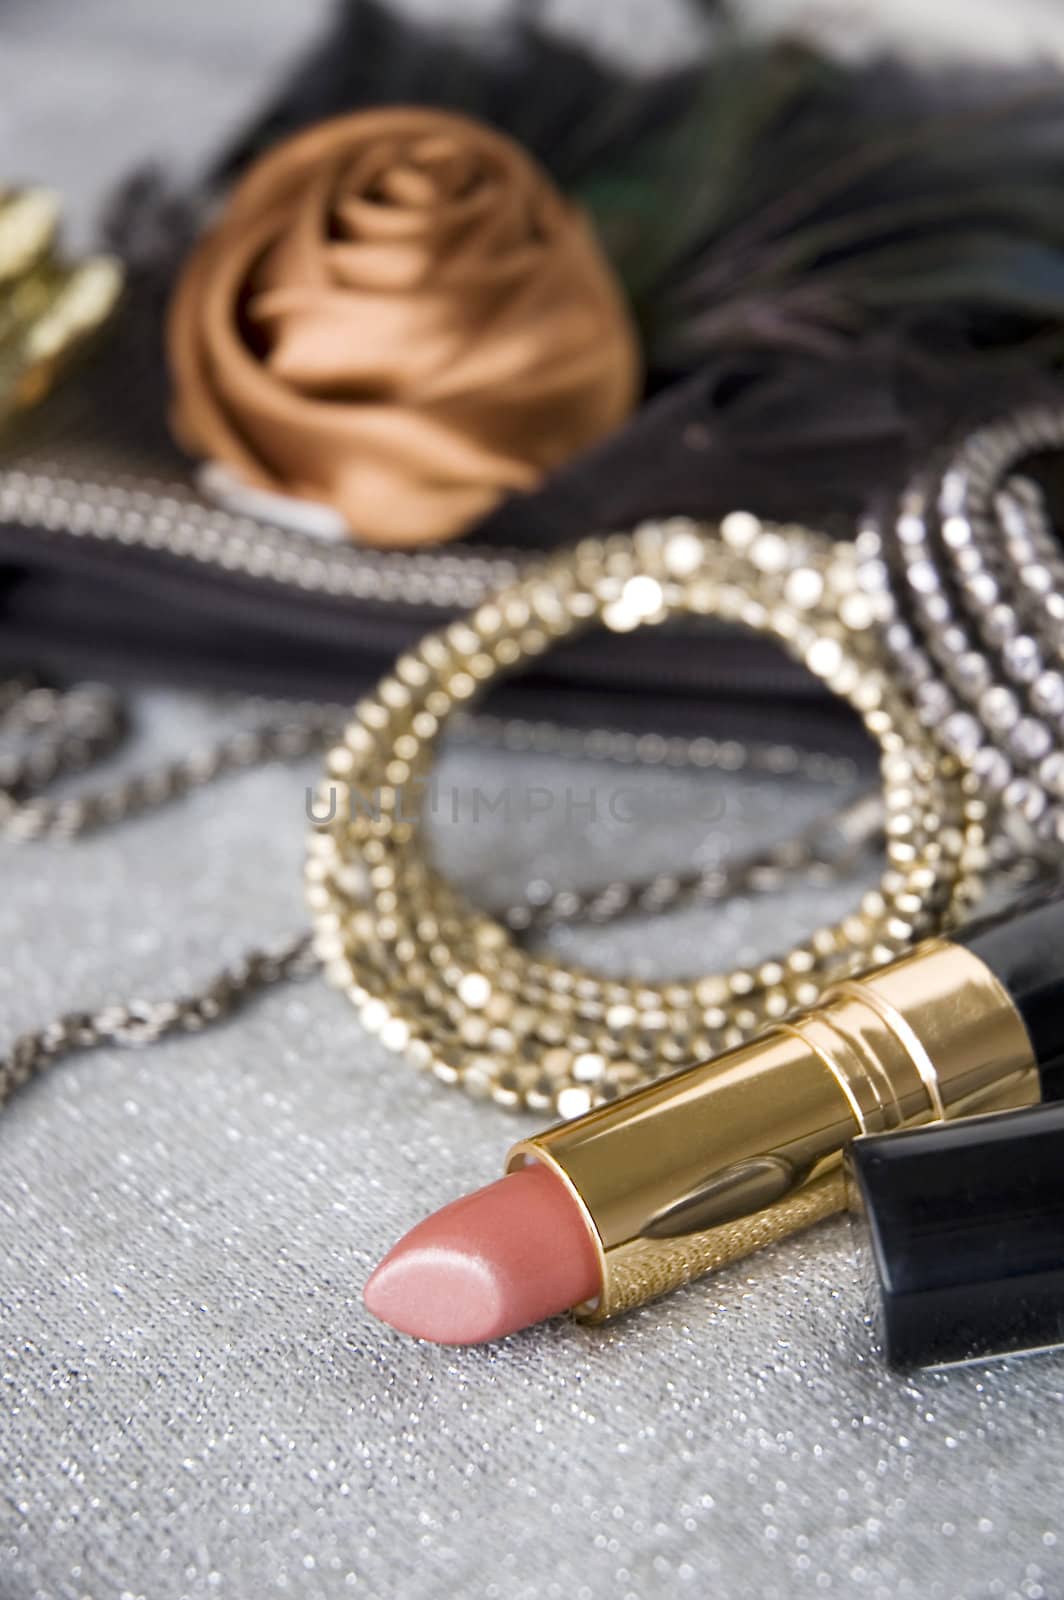 pink lipstick and accessories background